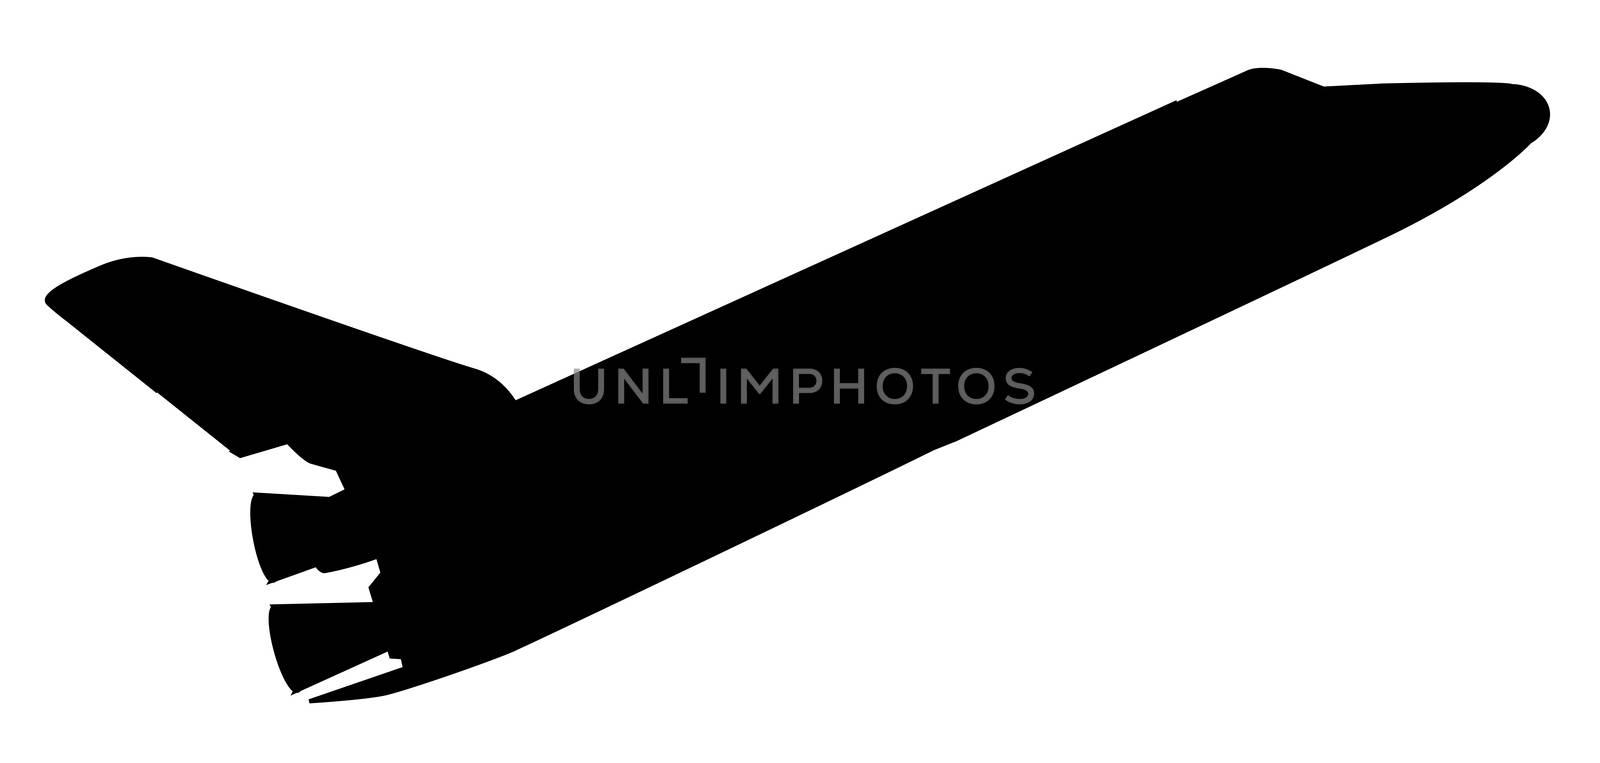 A typical space shuttle silhouette over a white background